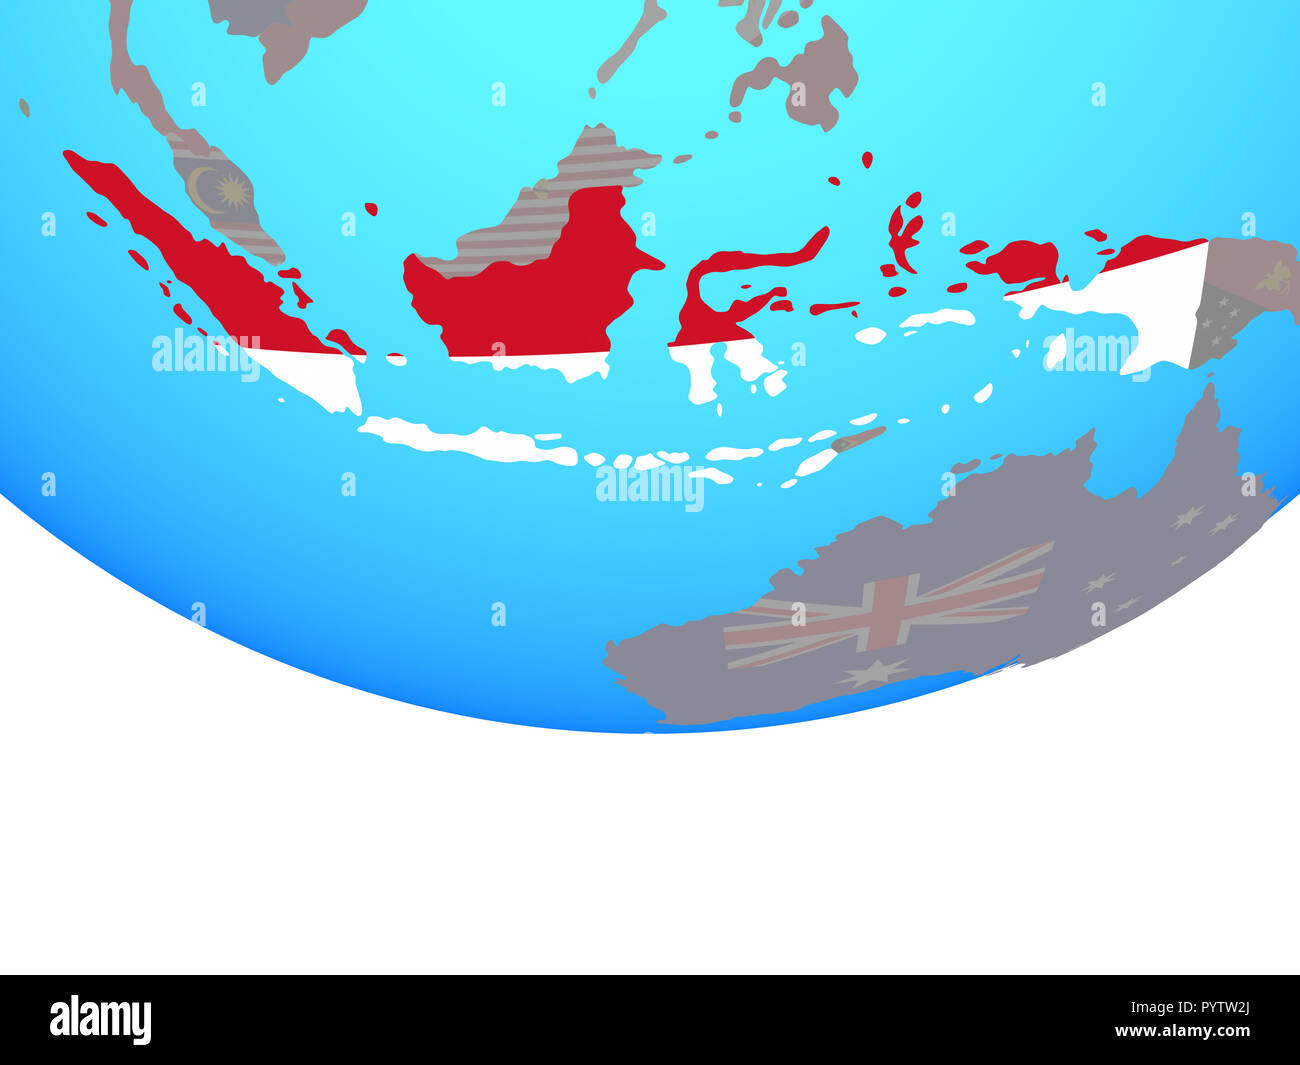 Indonesia with national flag on simple political globe. 3D illustration. Stock Photo